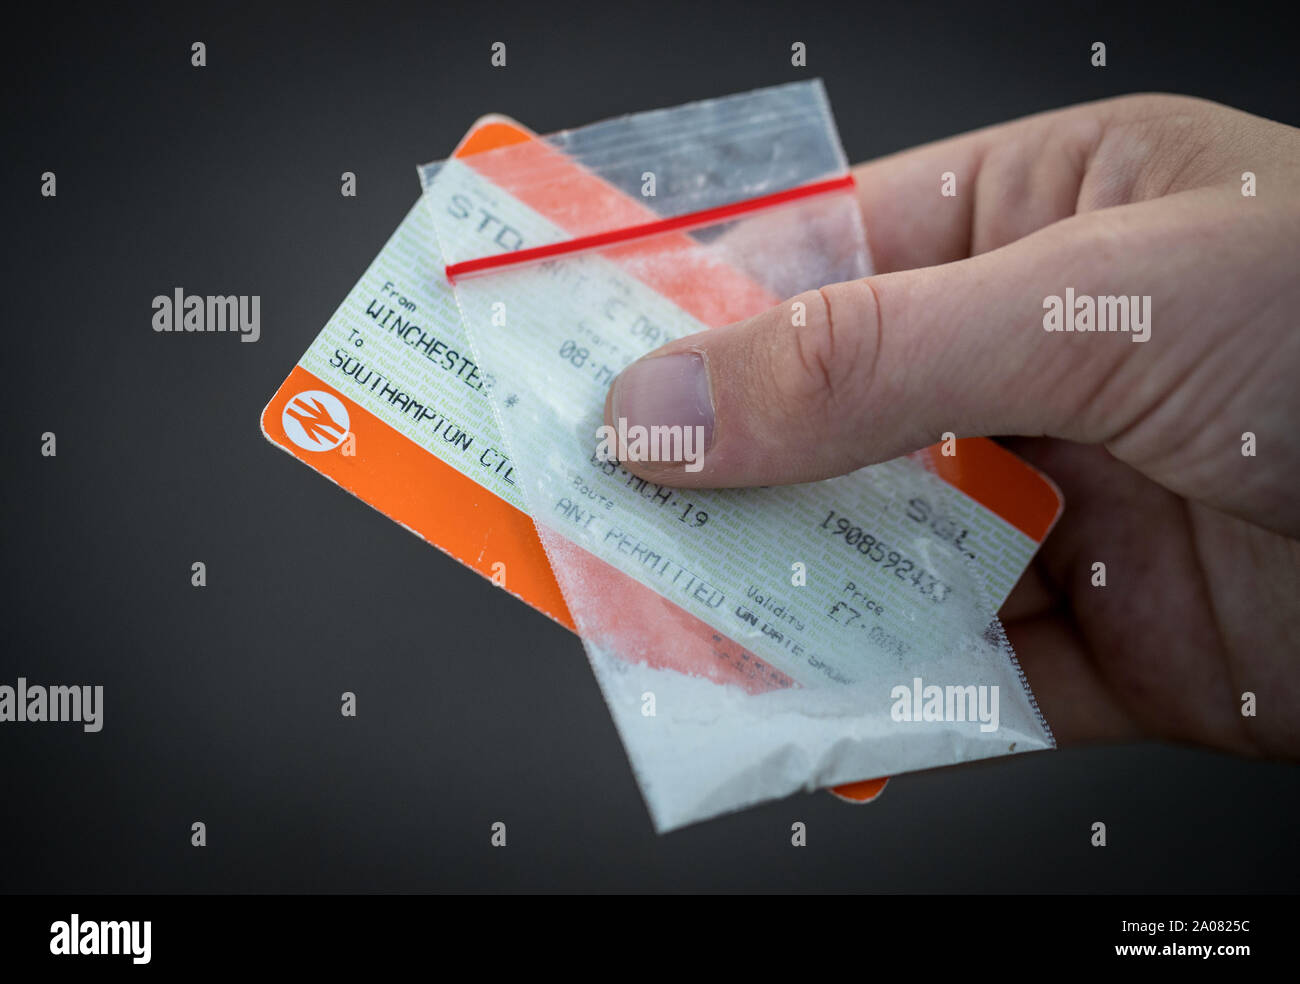 County lines drug dealing in the UK (model released image) Stock Photo